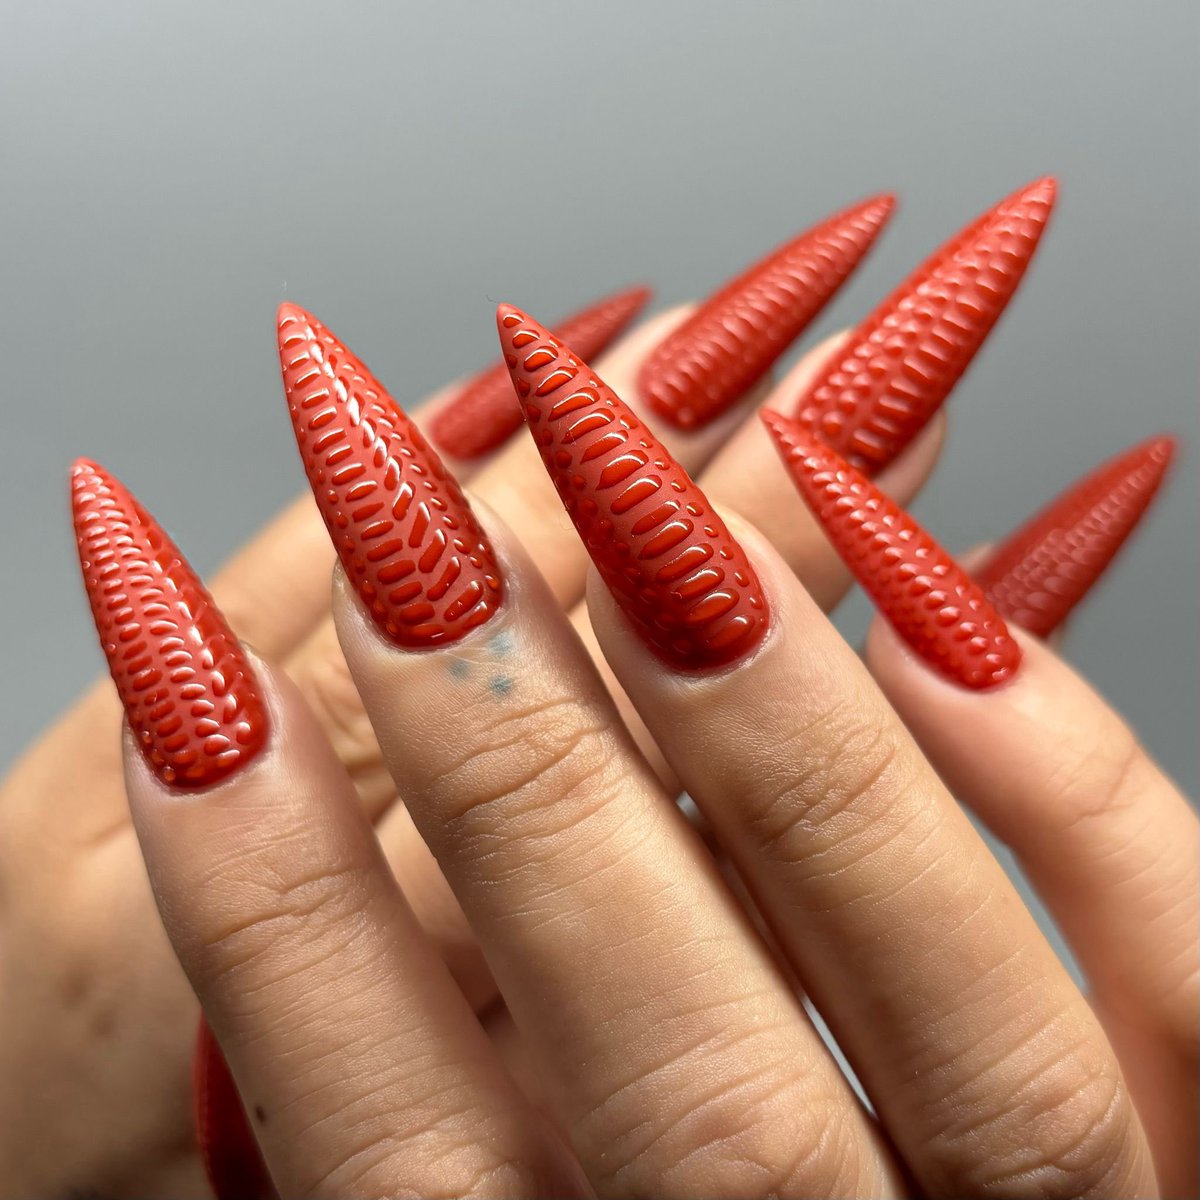 Nails looking violently sexy 🔪🔪🔪